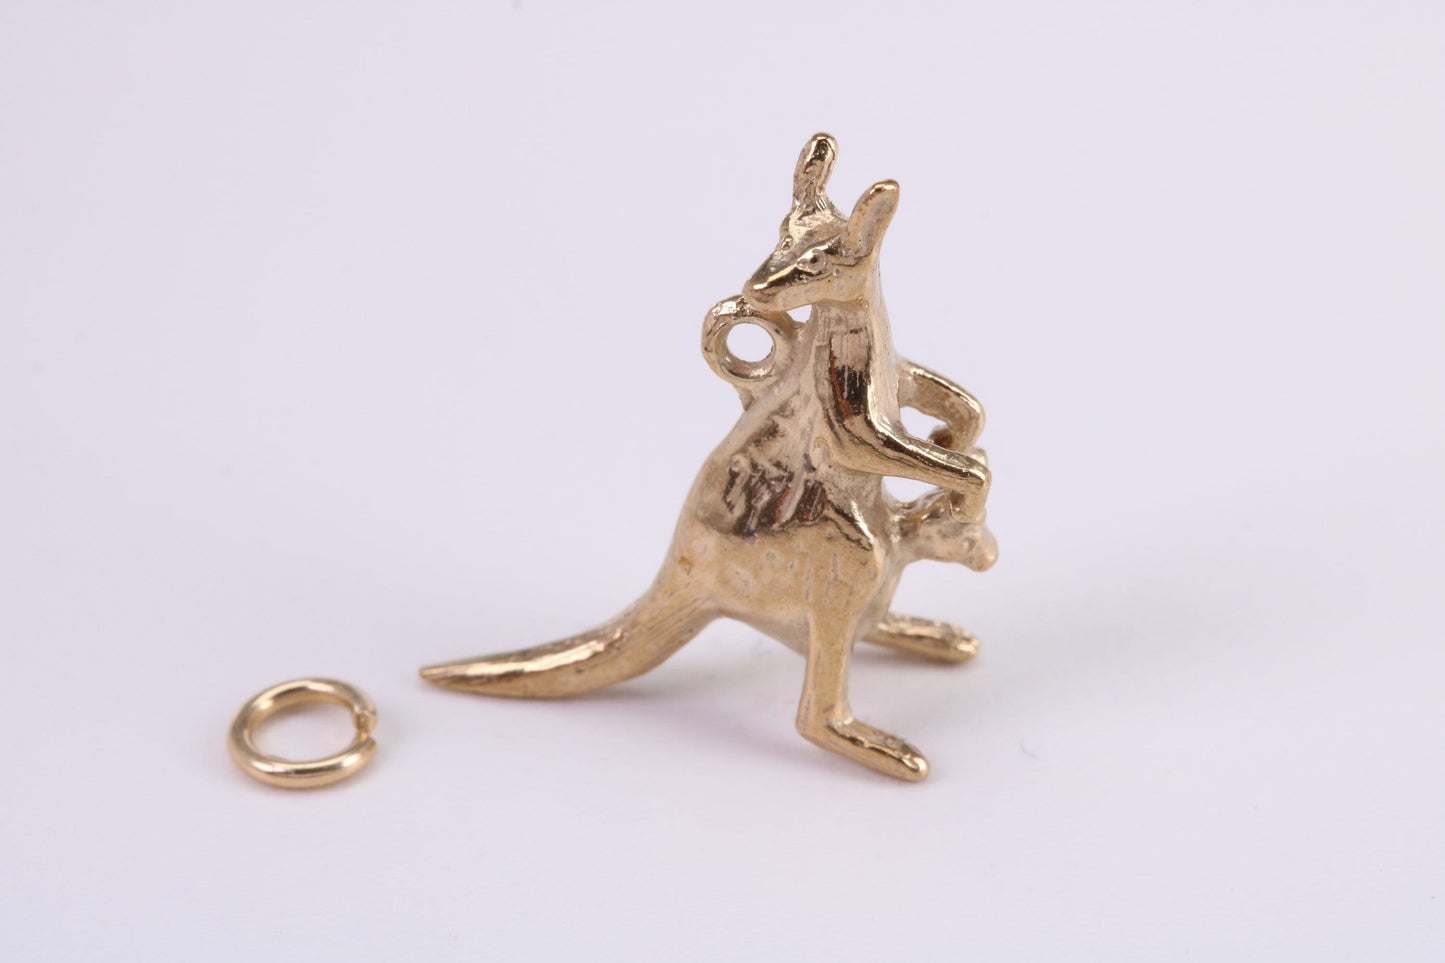 Kangaroo Charm, Traditional Charm, Made from Solid Yellow Gold, British Hallmarked, Complete with Attachment Link